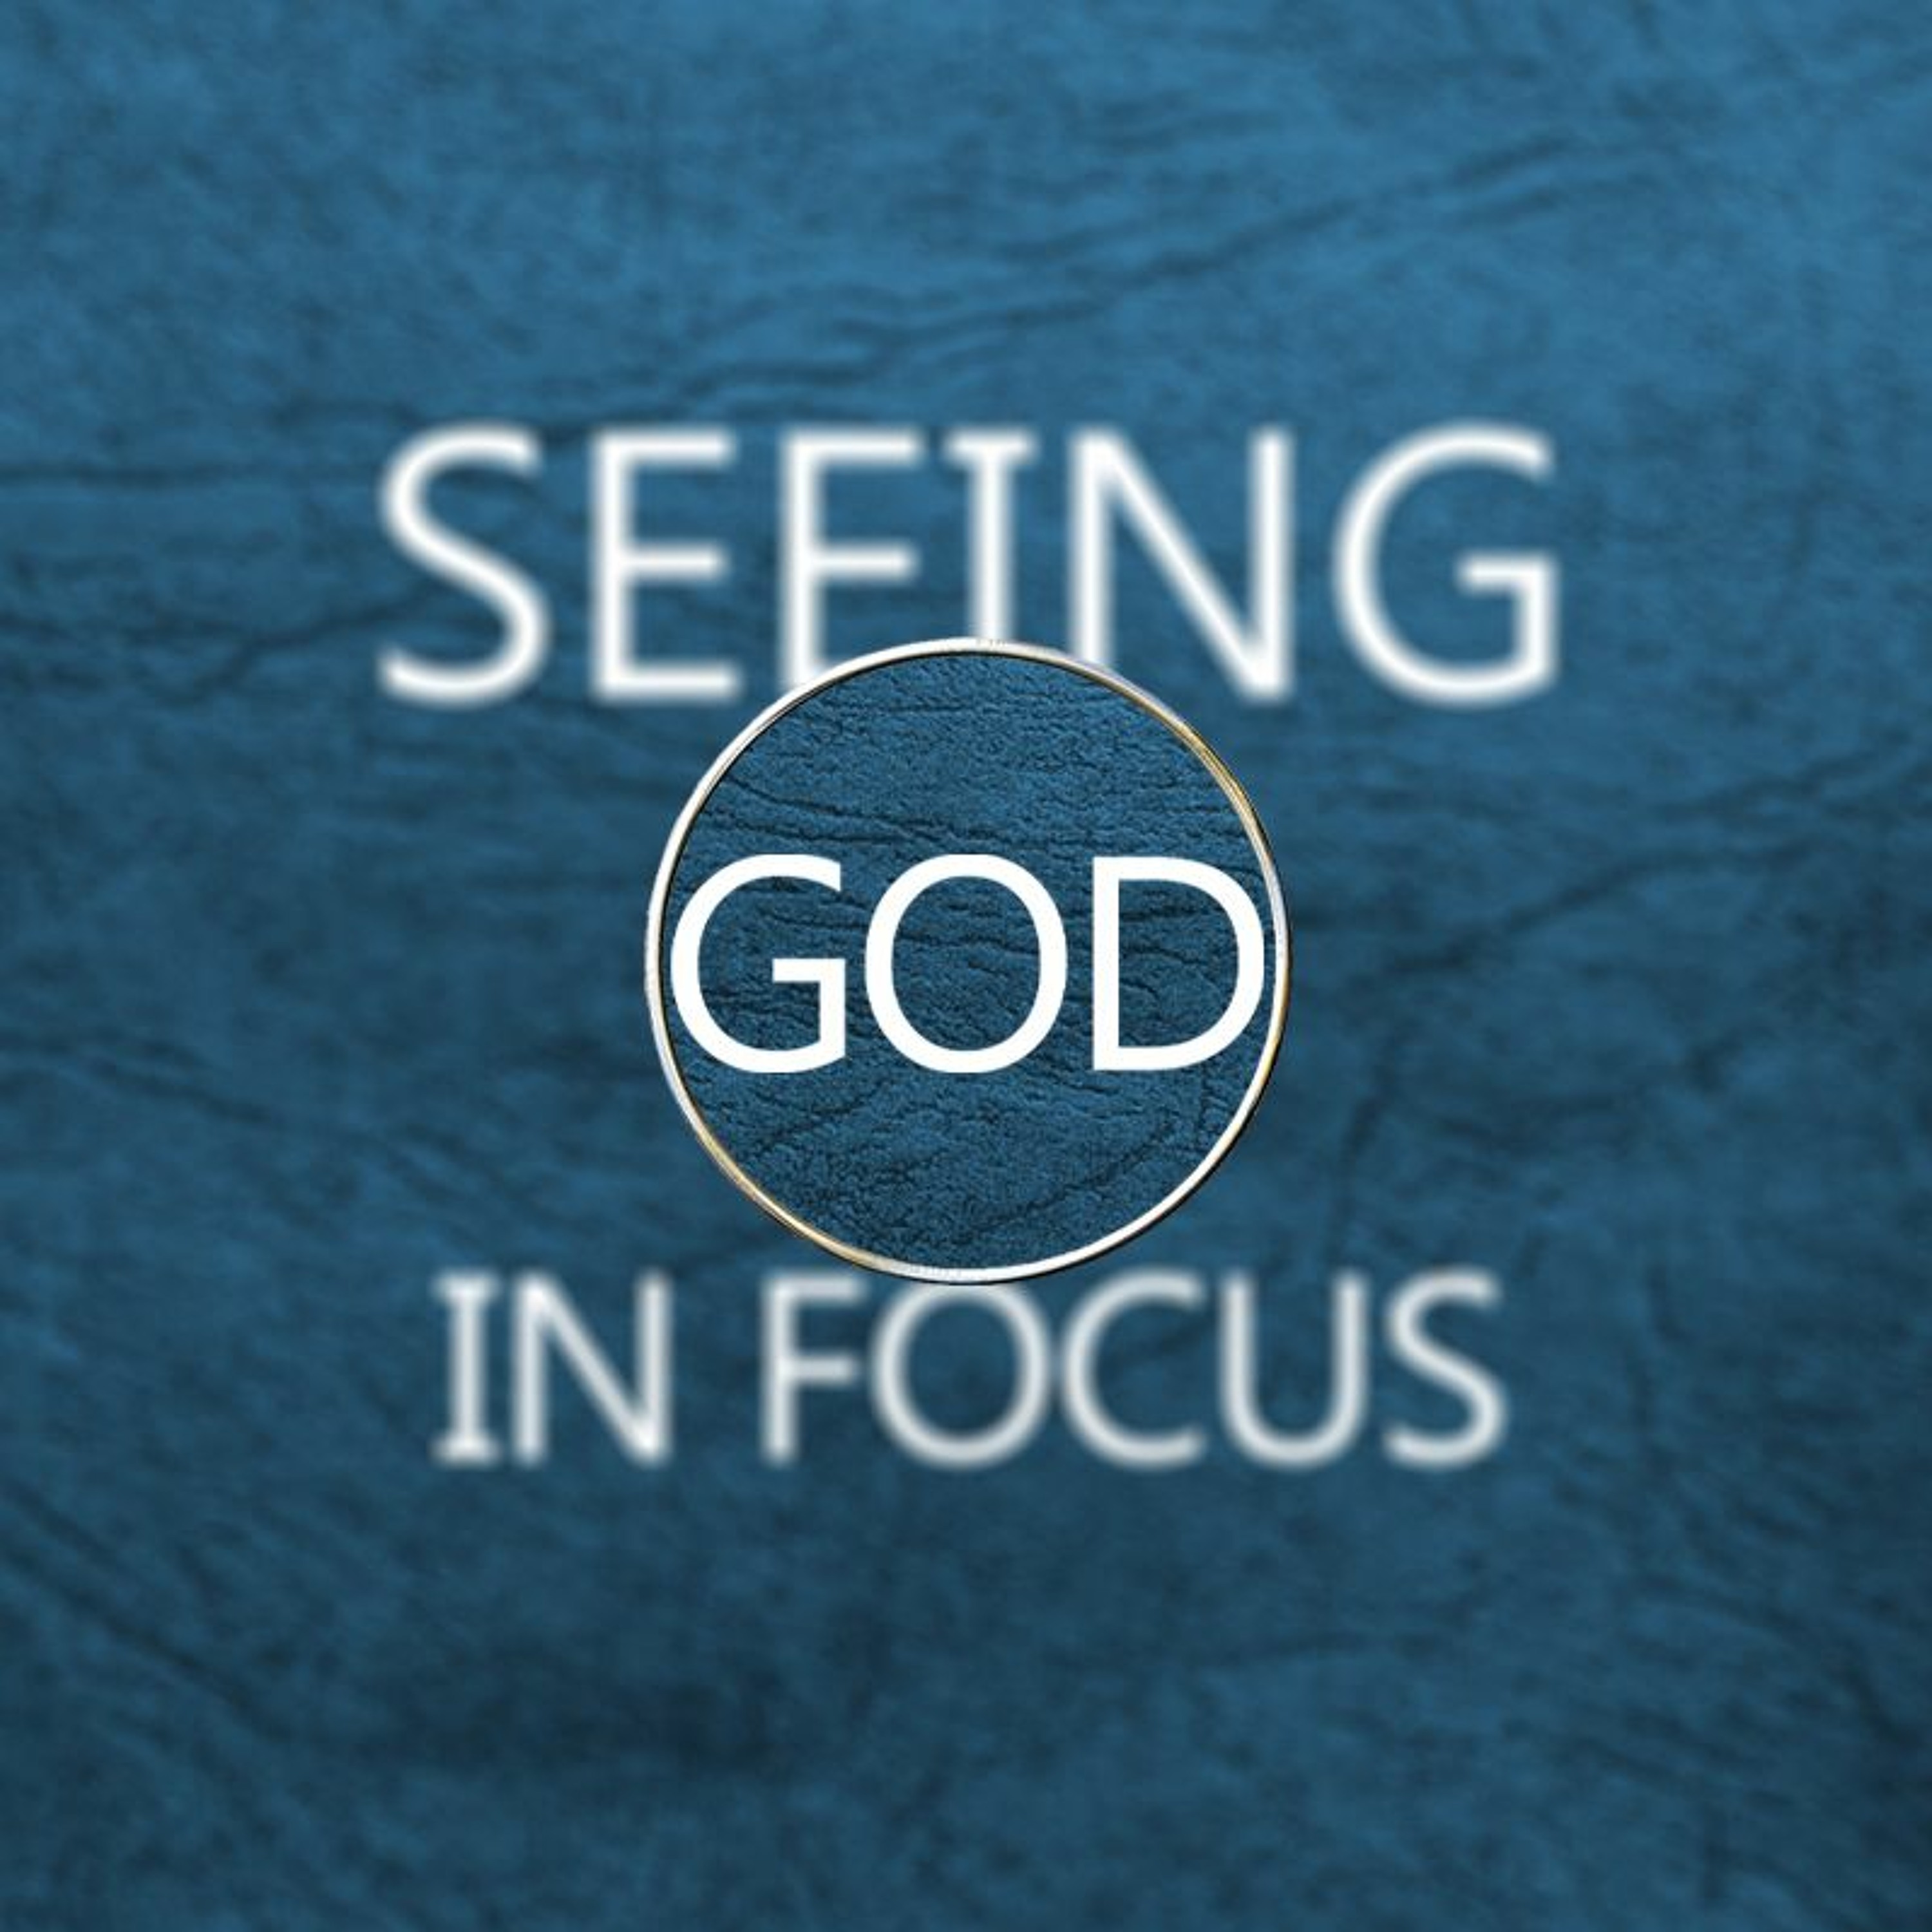 Seeing God in focus | Who He is